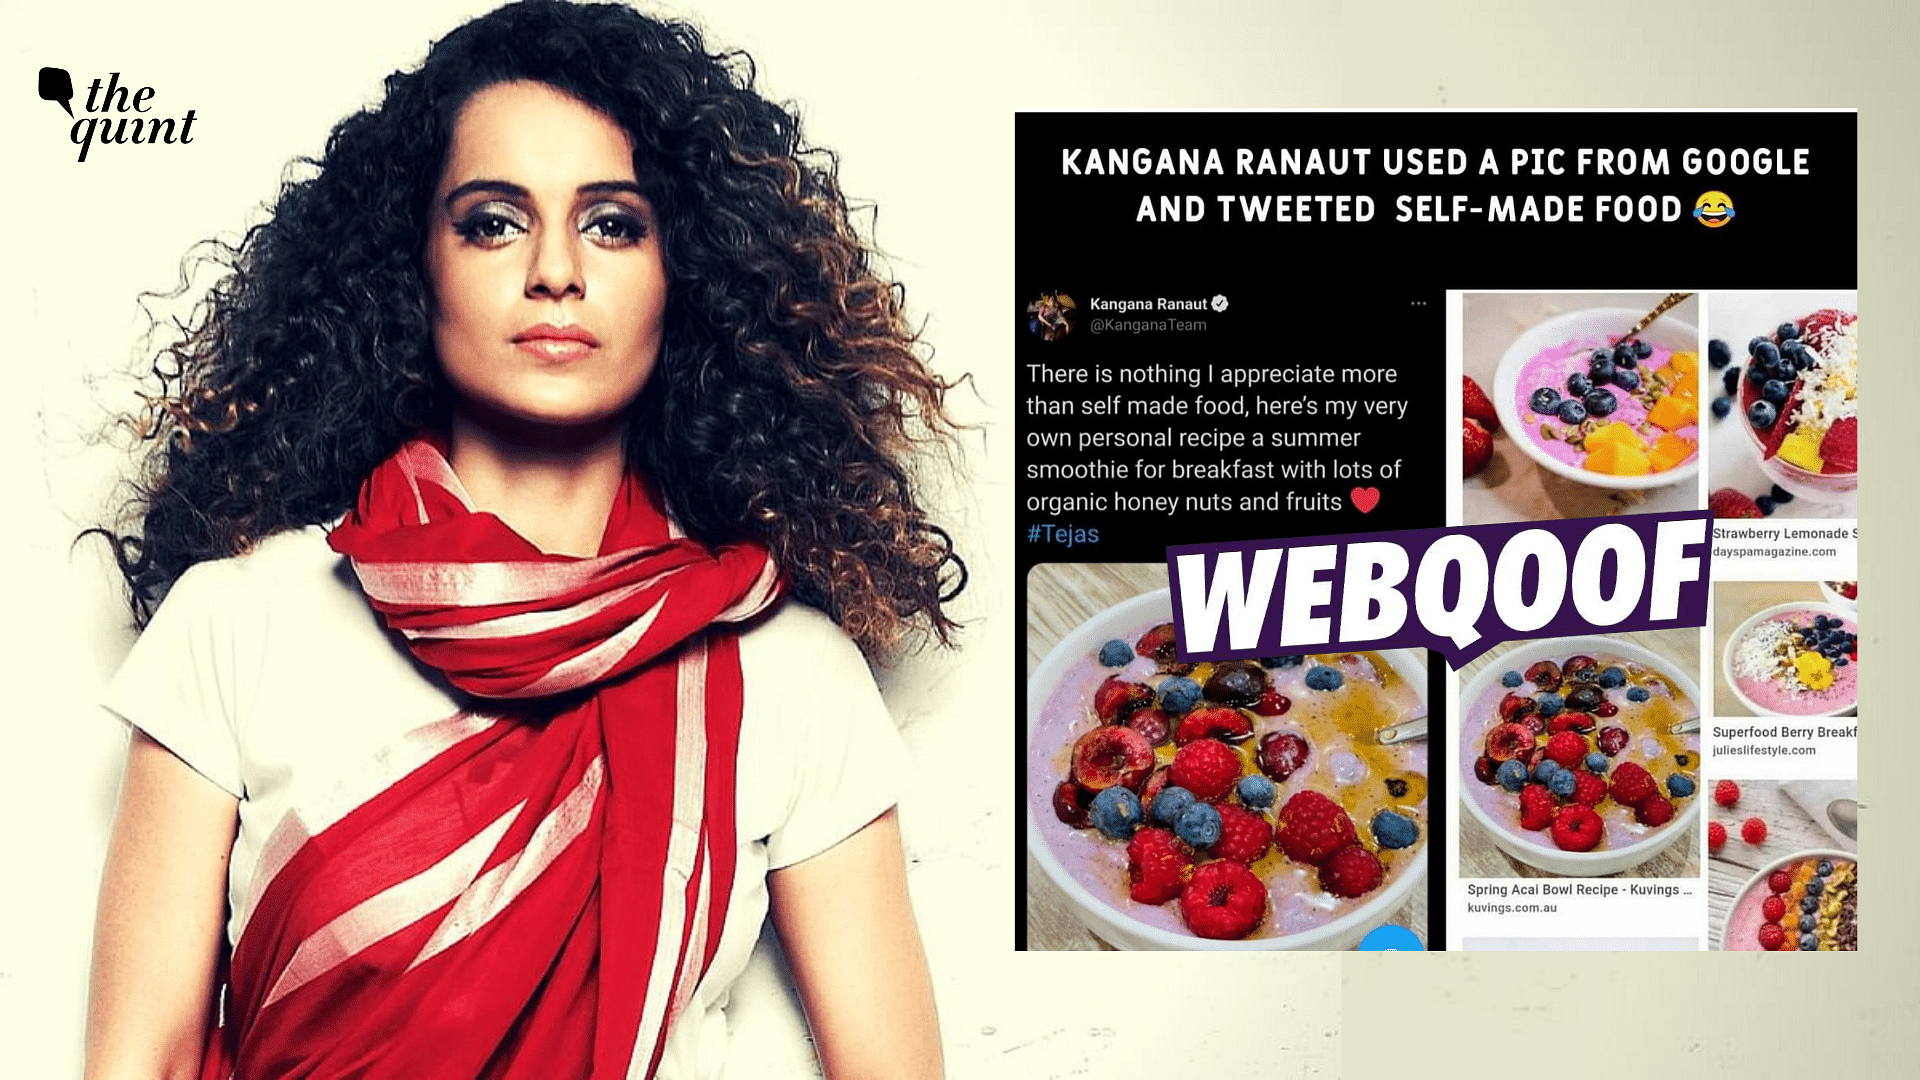 Several social media users falsely alleged that Kangana Ranaut had passed off an image from a recipe site as self-made food.